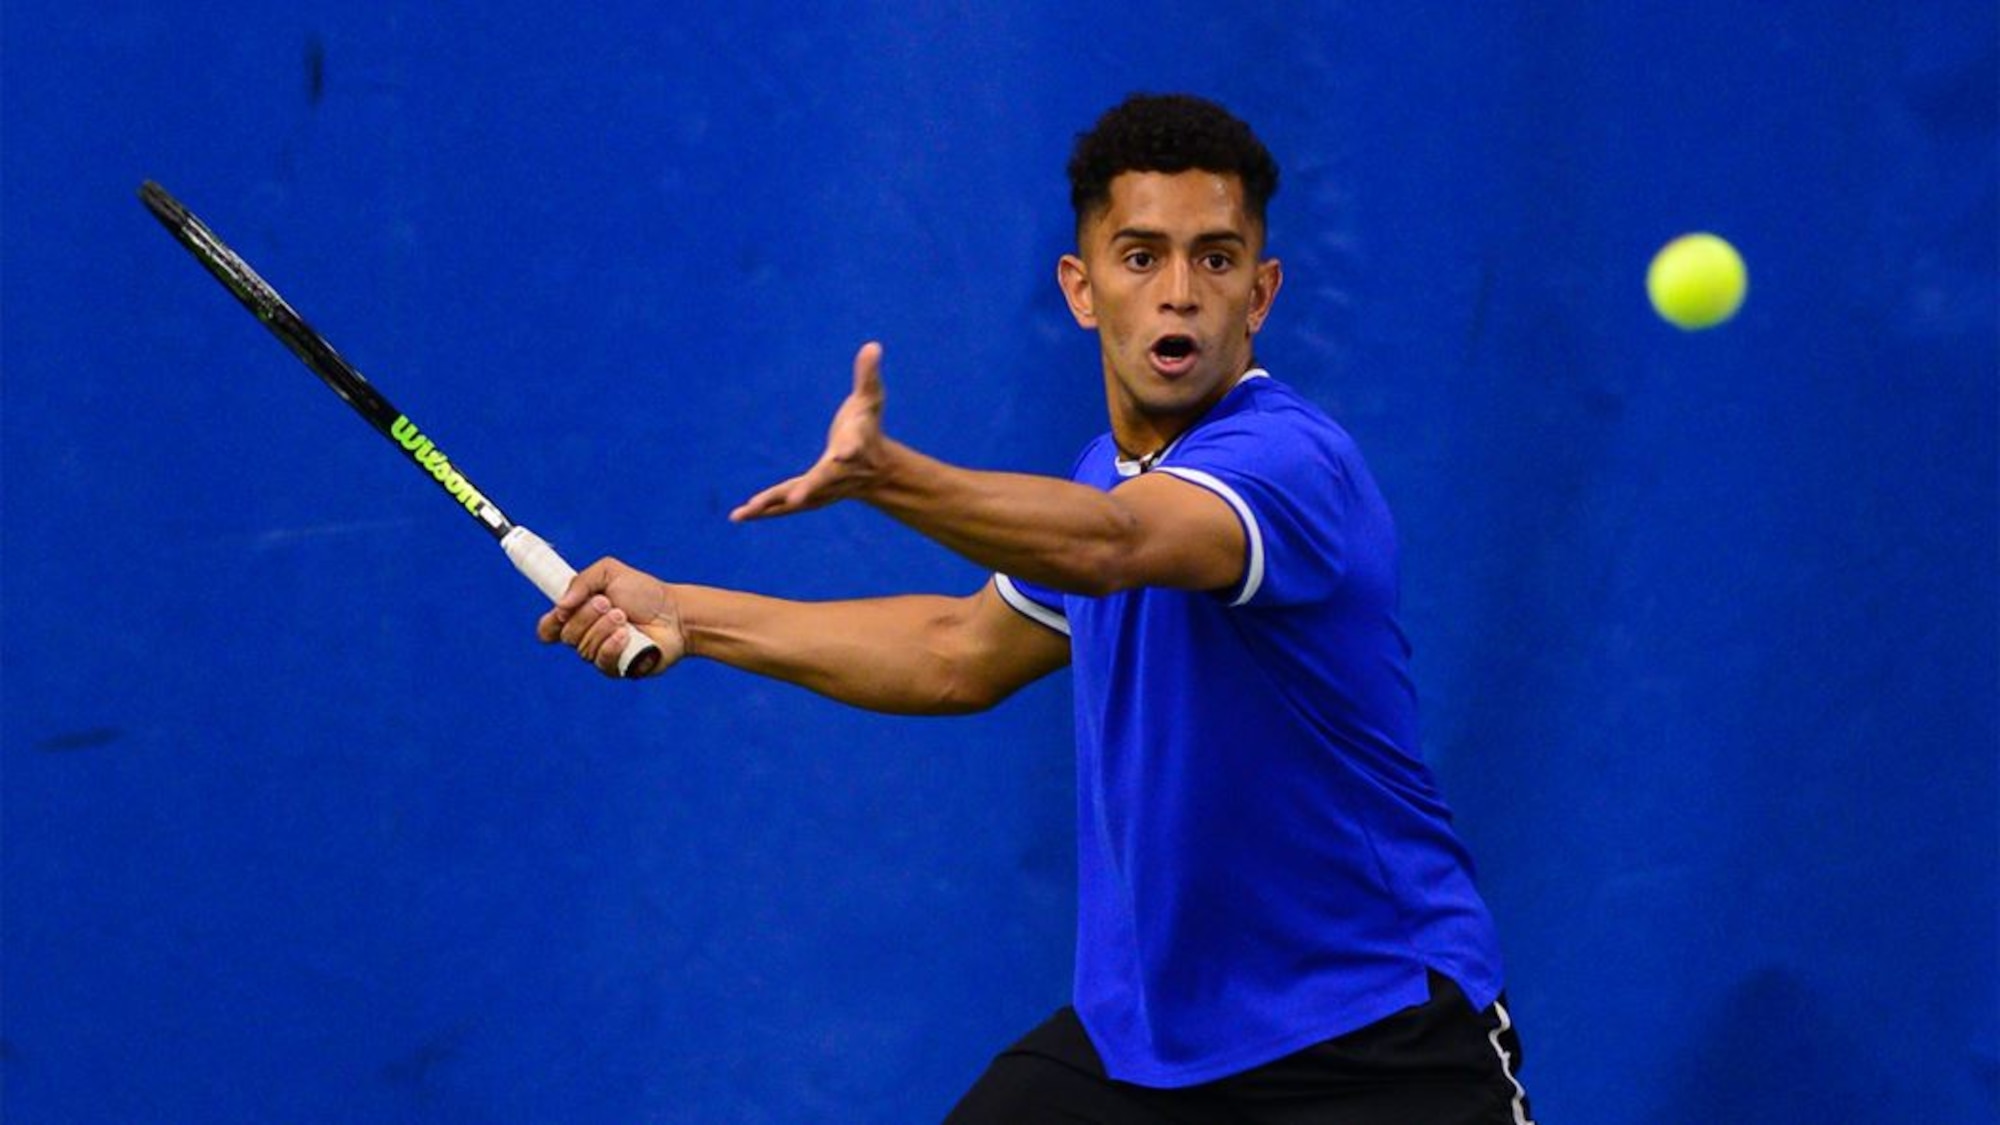 U.S. Air Force 2nd Lt. Isaac Perez prepares to return a serve during a match in this undated photo while a member of the United States Air Force Academy men’s tennis team. Perez, who will begin pilot training in early 2020, has been named a 2019 recipient of the Intercollegiate Tennis Association’s national Arthur Ashe Jr. Leadership and Sportsmanship award. (U.S. Air Force courtesy photo)